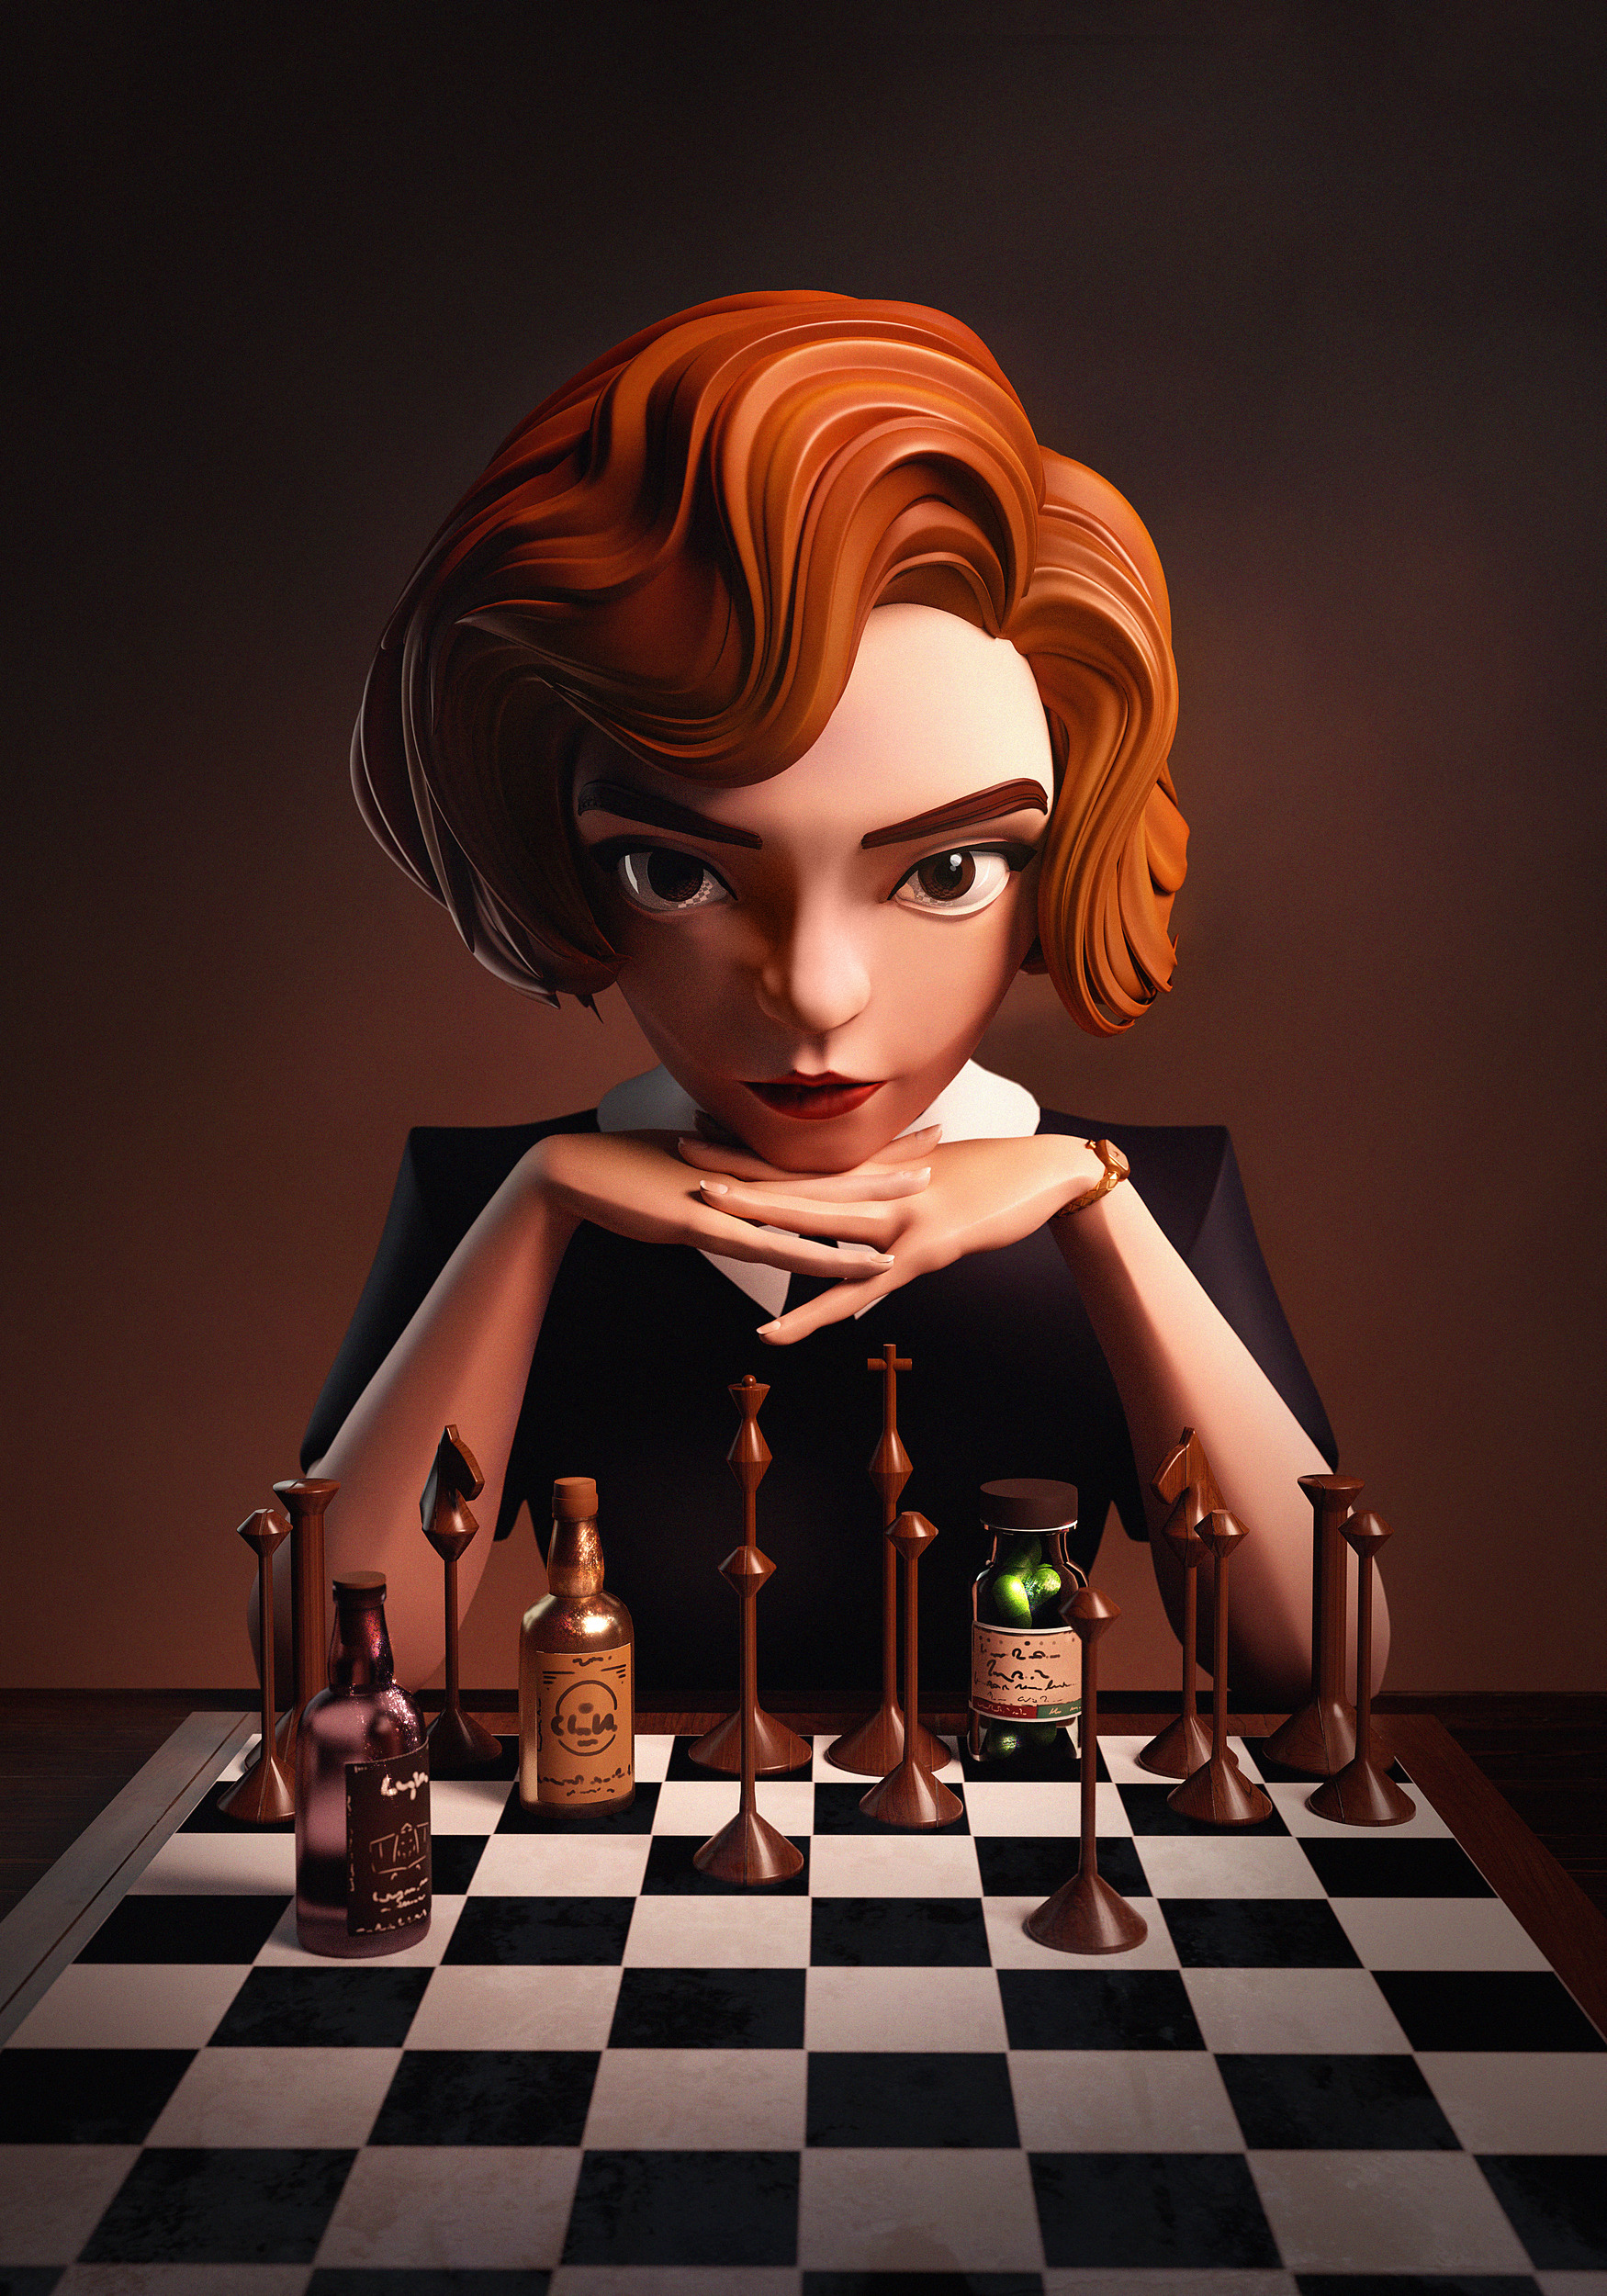 Image of beth harmon from the queen's gambit